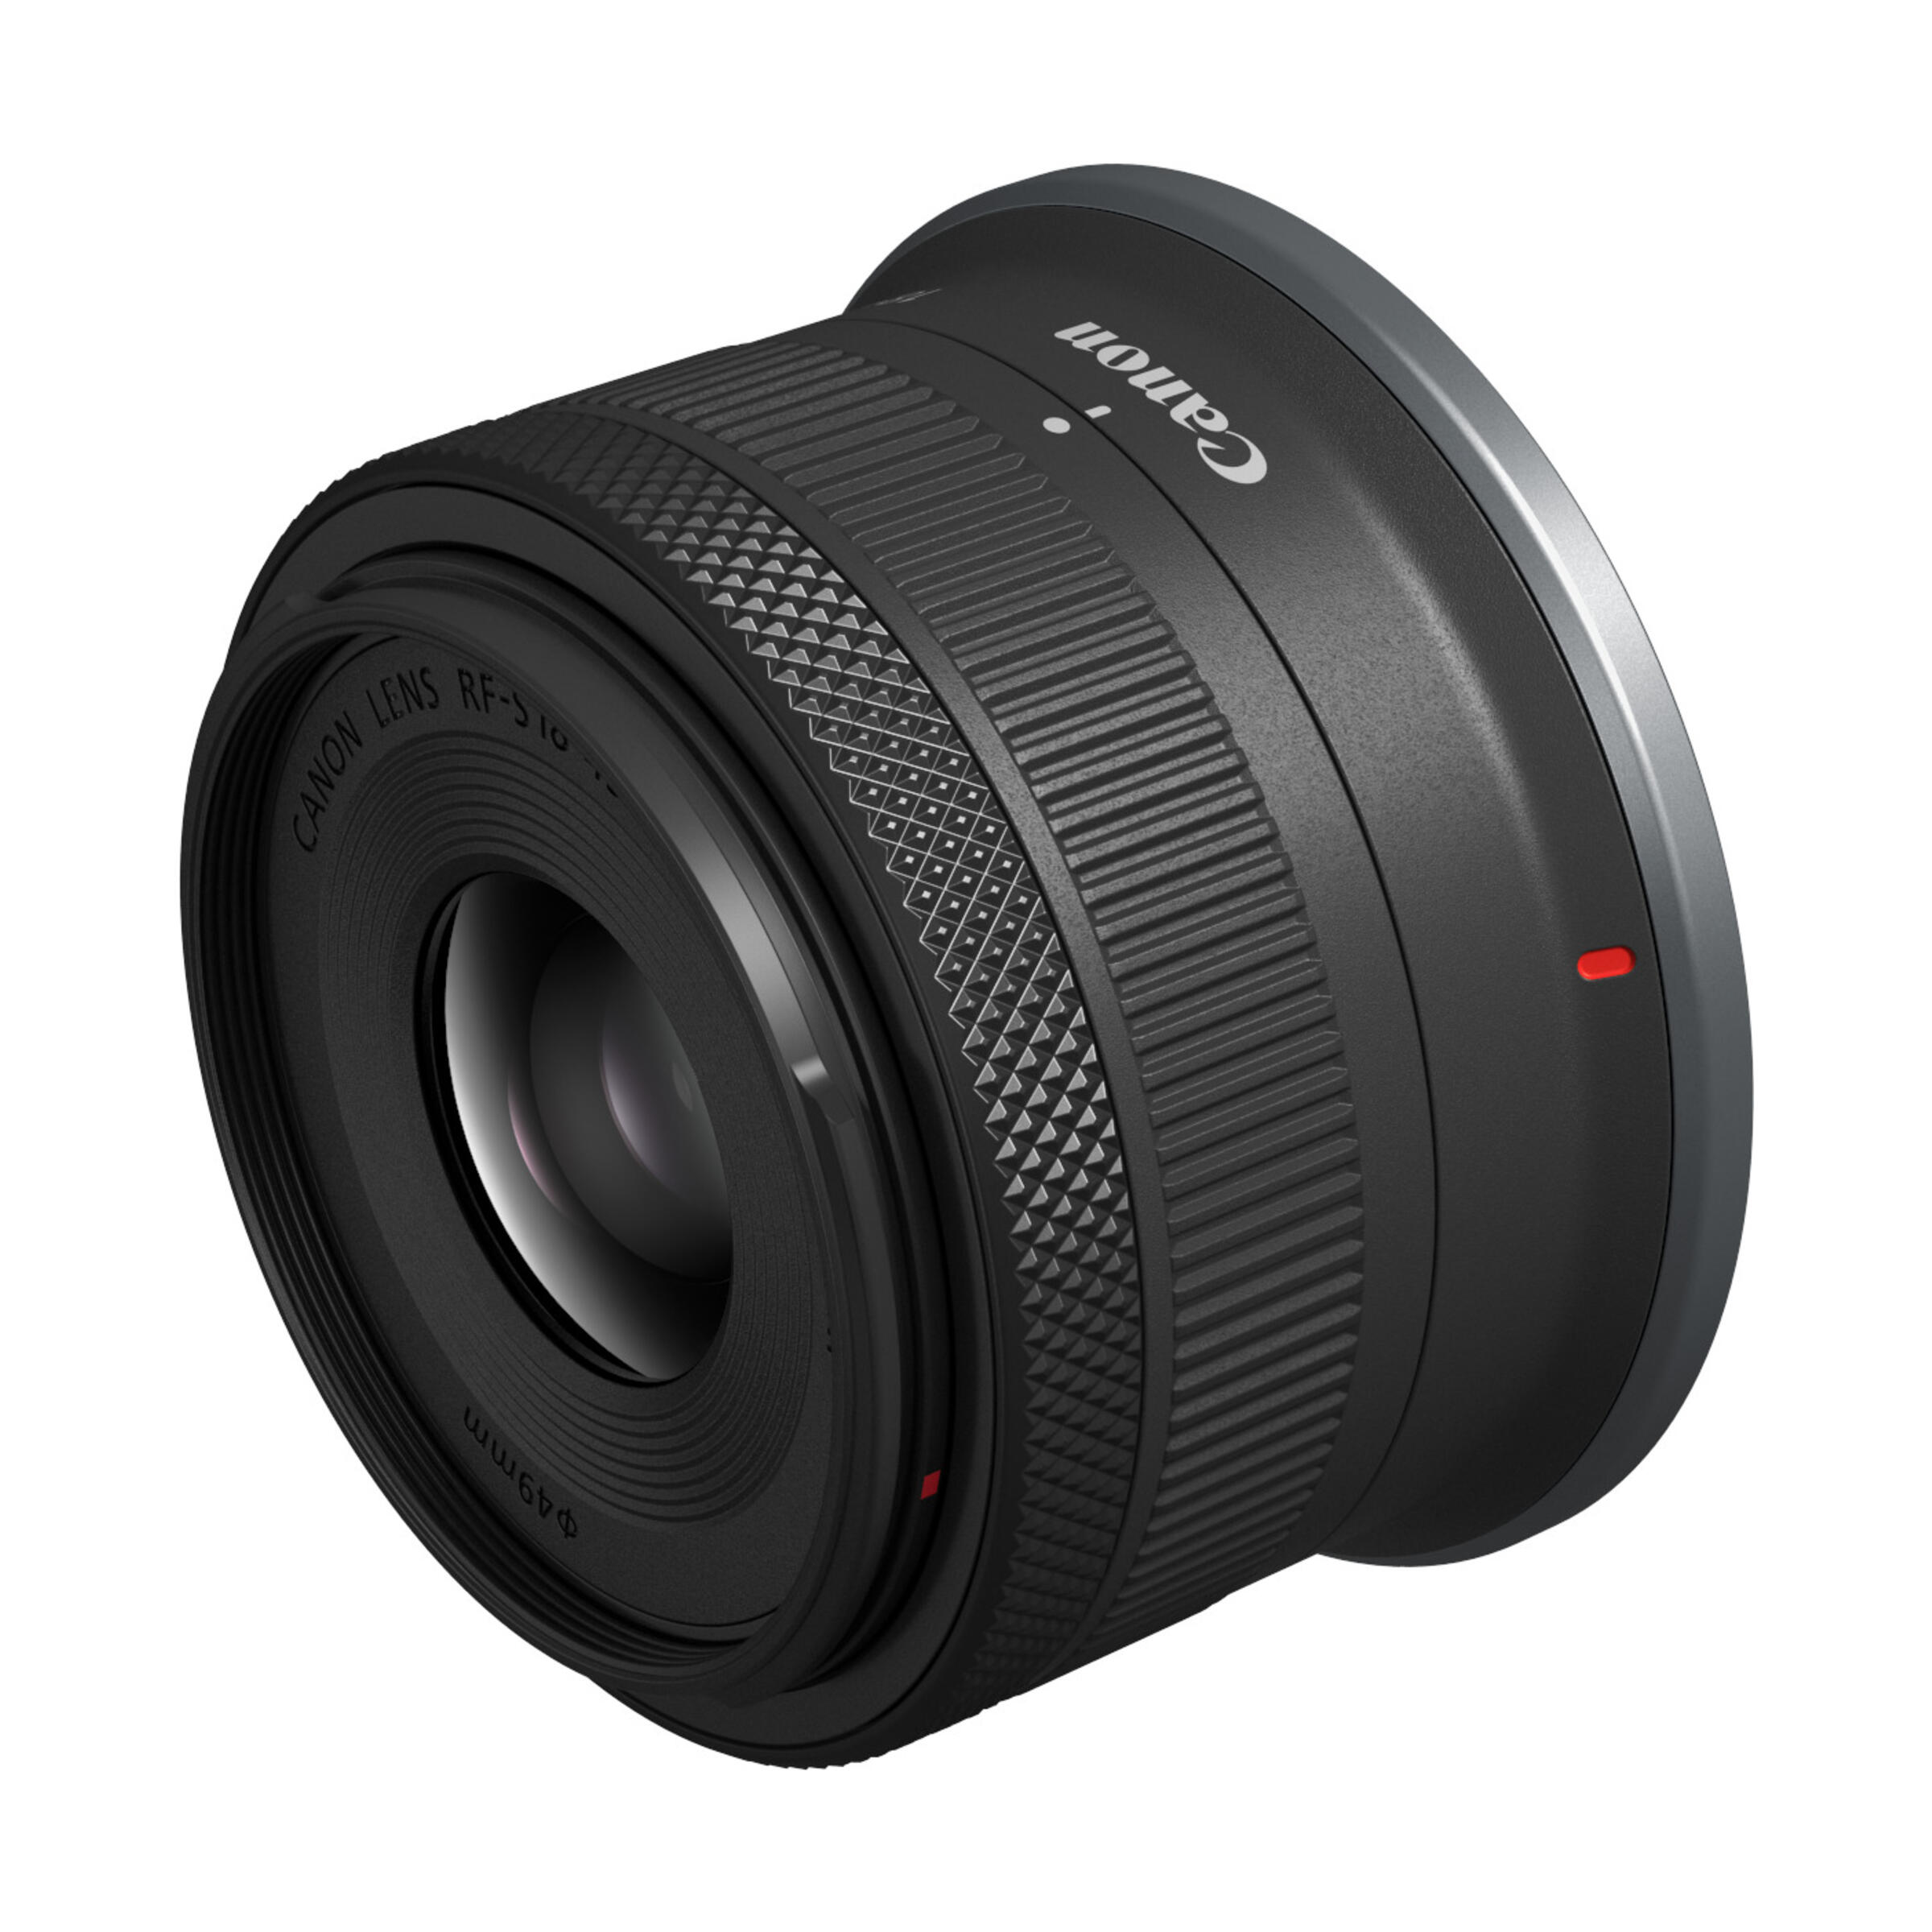 Canon RF-S 18-45mm f/4,5-6,3 IS STM